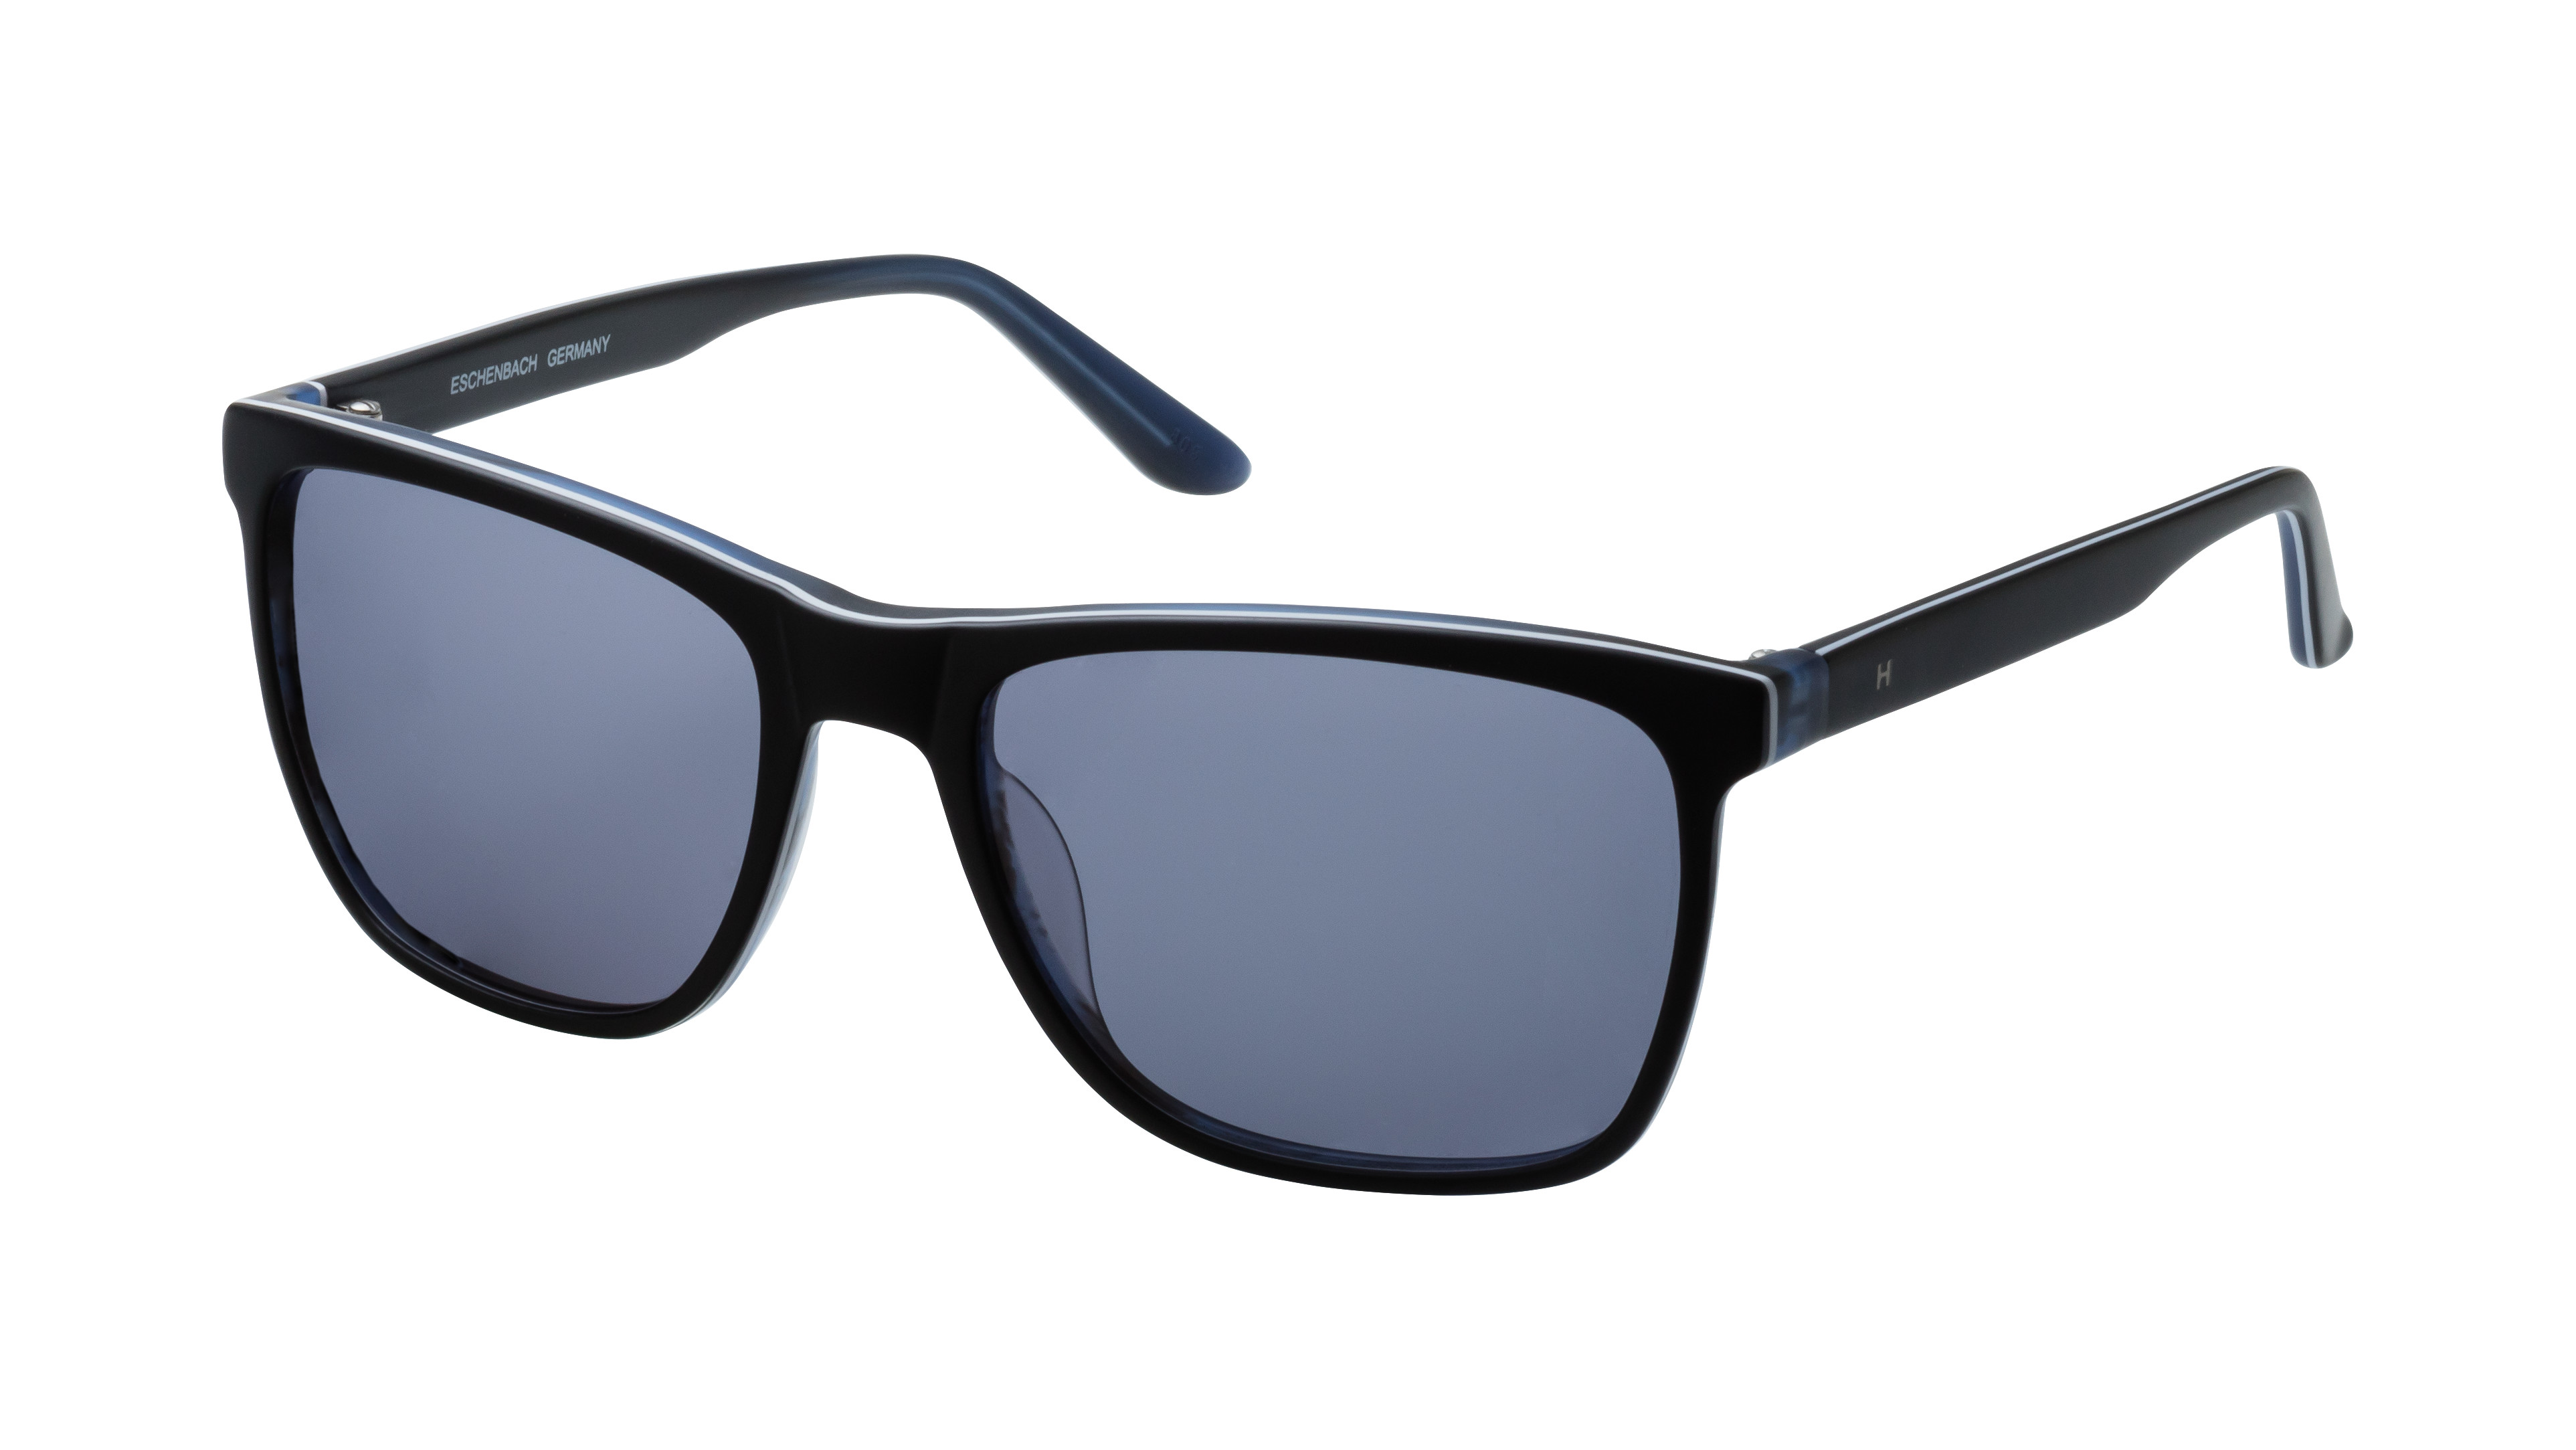 [products.image.angle_left01] HUMPHREY´S eyewear 588089 17 Sonnenbrille